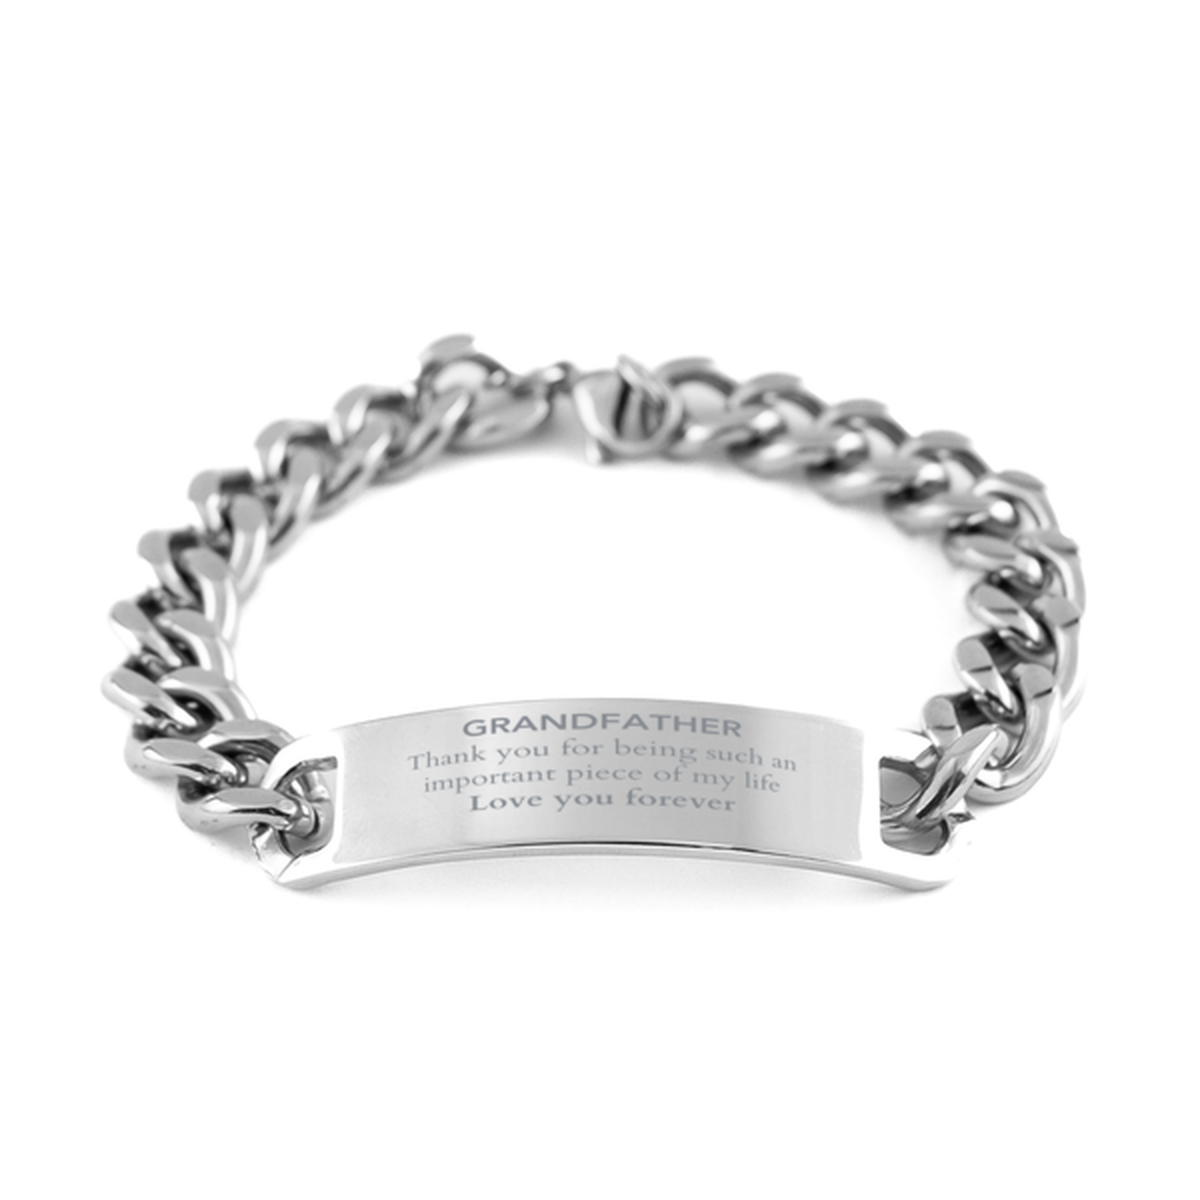 Appropriate Grandfather Cuban Chain Stainless Steel Bracelet Epic Birthday Gifts for Grandfather Thank you for being such an important piece of my life Grandfather Christmas Mothers Fathers Day